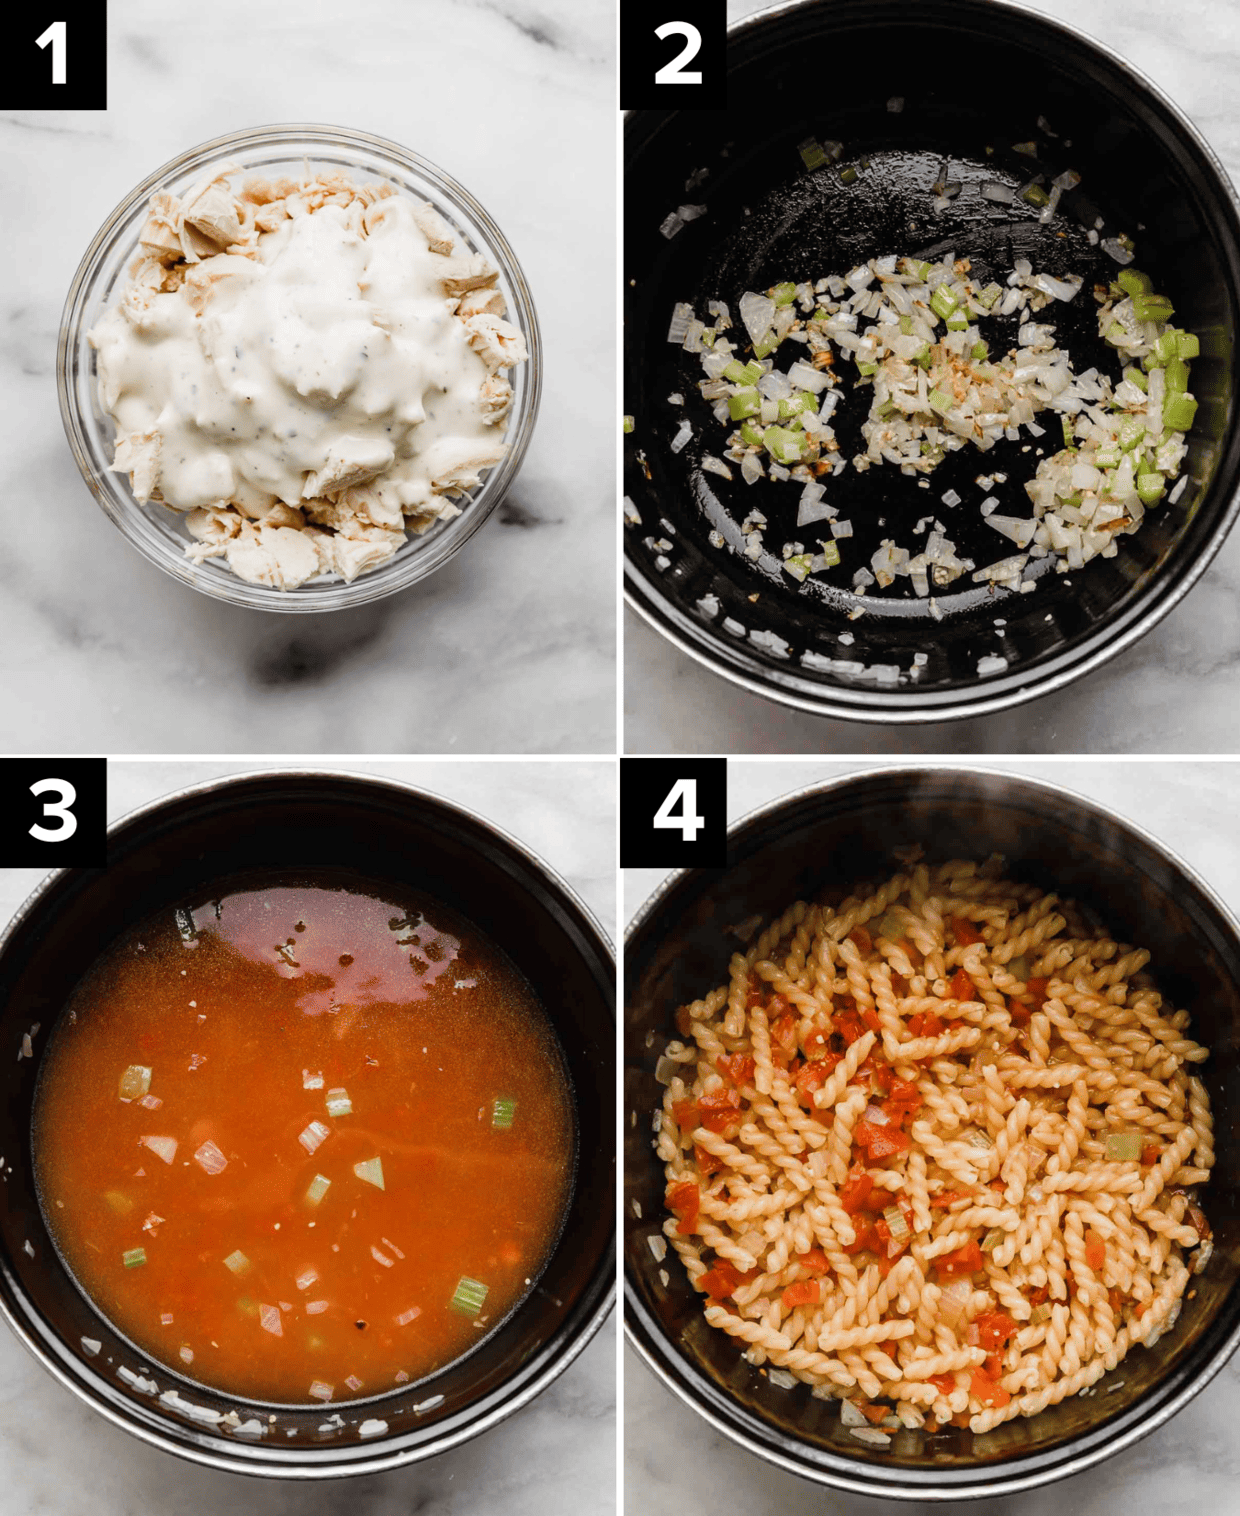 Four images showing how to make Buffalo Chicken Pasta, top left image is chicken in a glass bowl with ranch dressing overtop, top right is celery and onion in a pot, bottom left is red liquid in black pot, bottom right is cooked pasta in a pot.